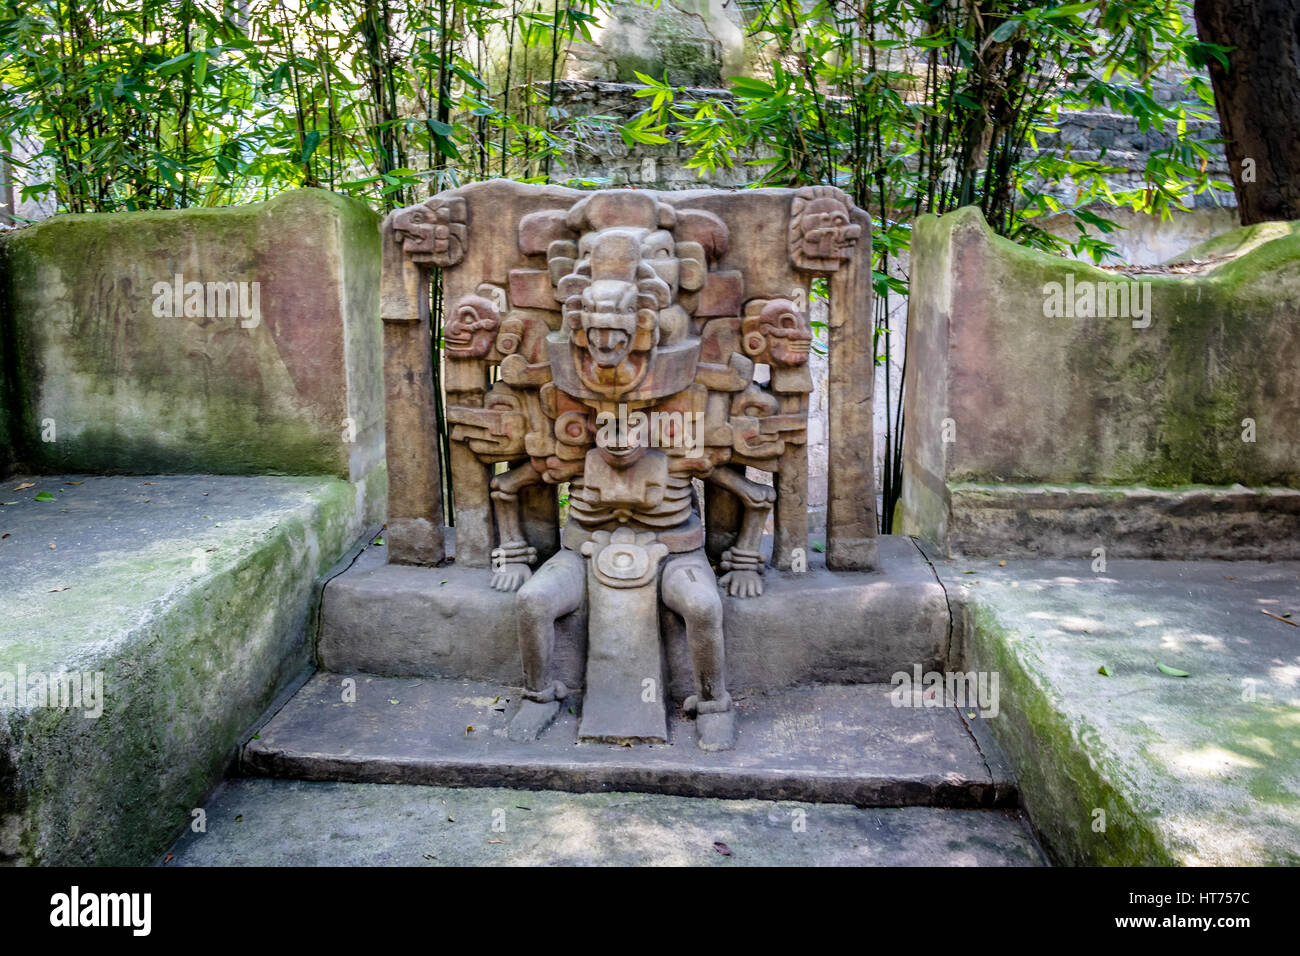 Totonac God of the Dead Sculpture at Anthropology Museum - Mexico City, Mexico Stock Photo